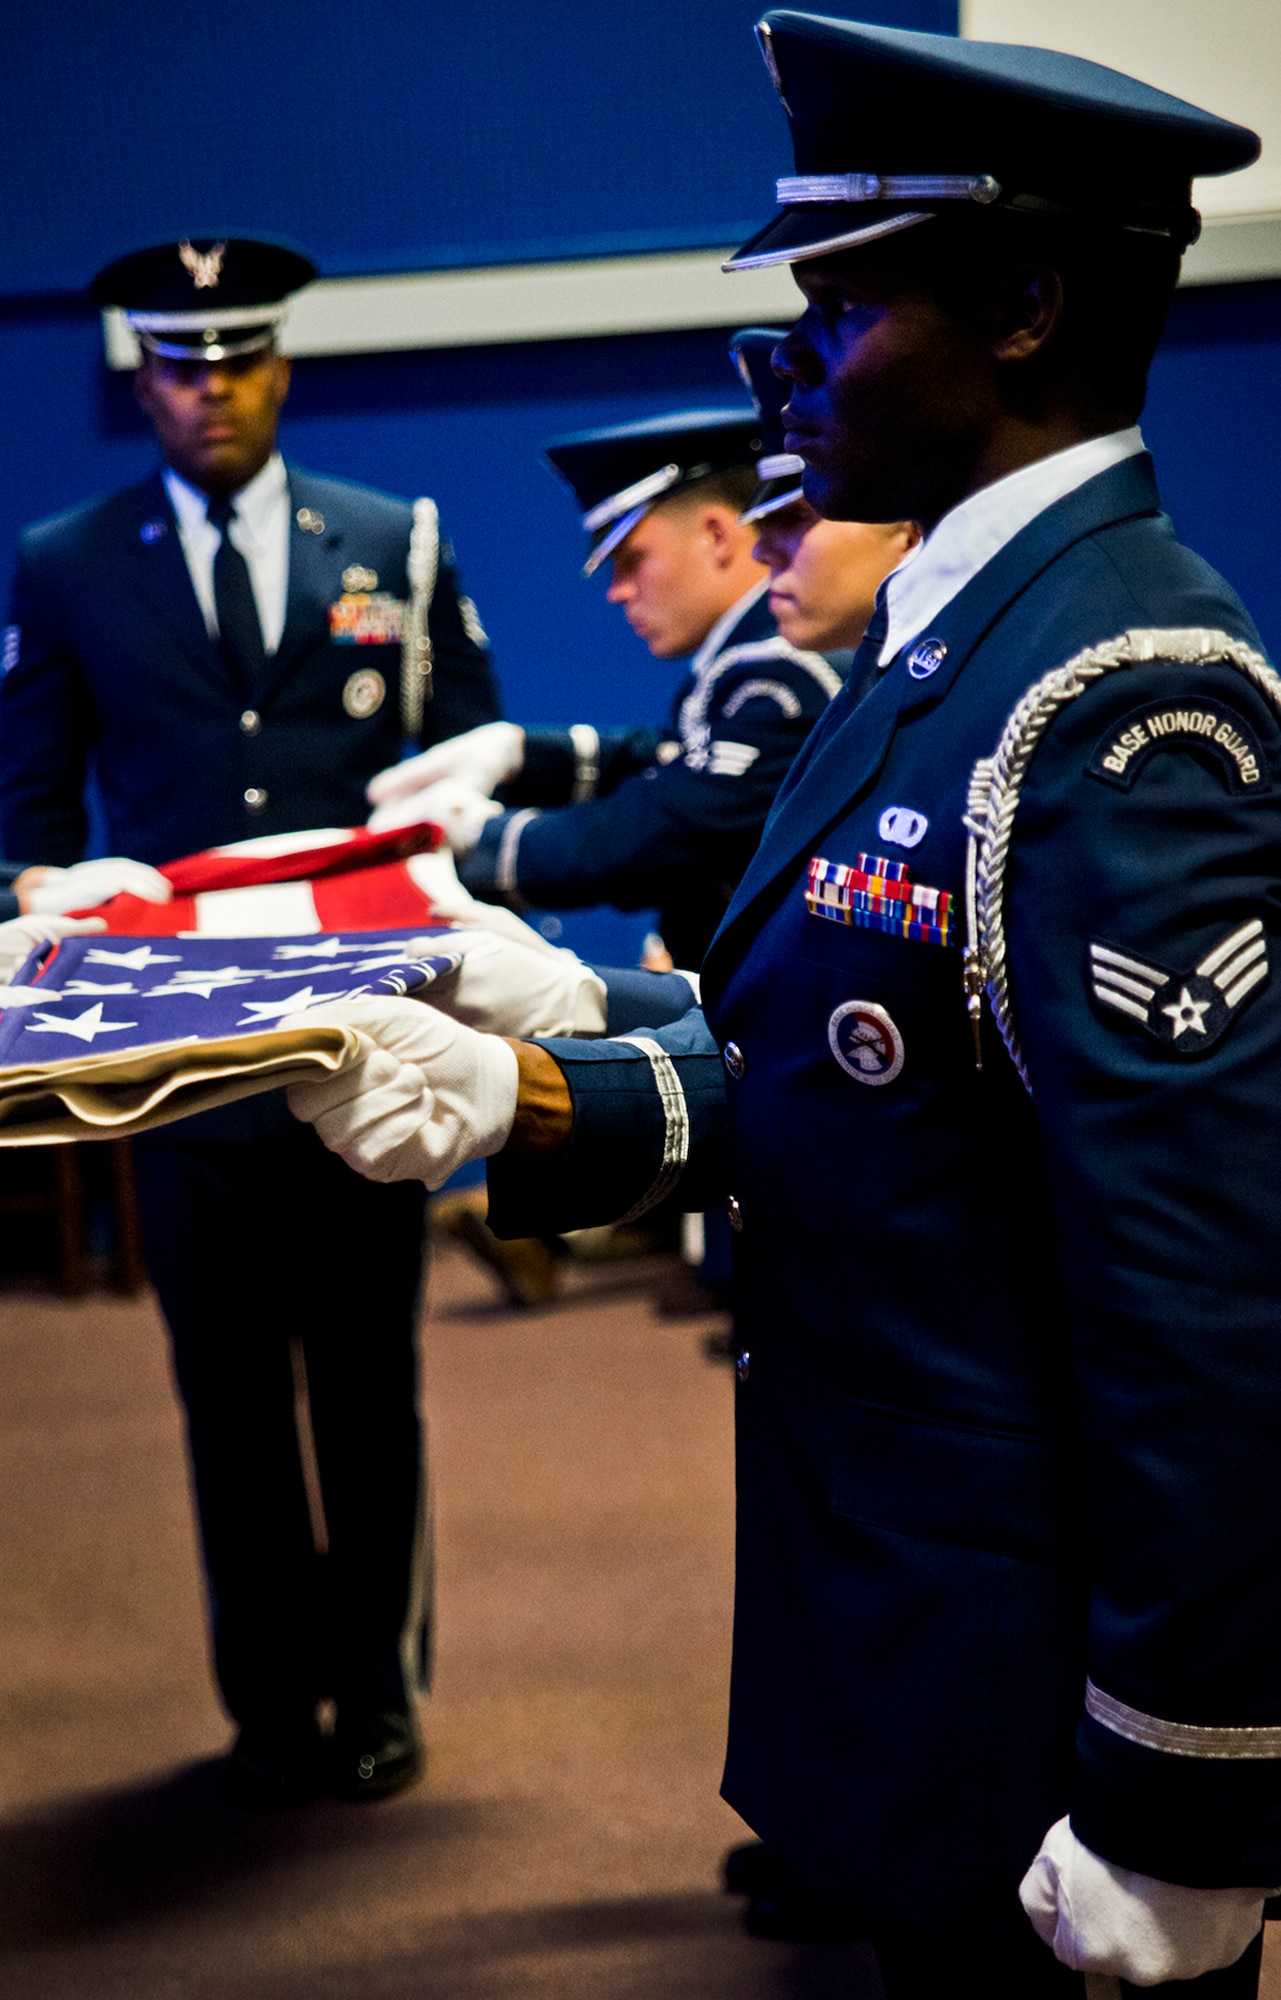 An American flag is folded by the Eglin Honor Guard to be presented to Senior Airman Josh Santos’ mother, Lisa, during his memorial Jan. 13 at Duke Field, Fla.  Santos passed away Nov. 26 from colon cancer.  He was a radio operator with the 711th Special Operations Squadron.  During the memorial, it was announced the Duke Field gym would be renamed Santos Strength in his honor.  (U.S. Air Force photo/Tech. Sgt. Samuel King Jr.)